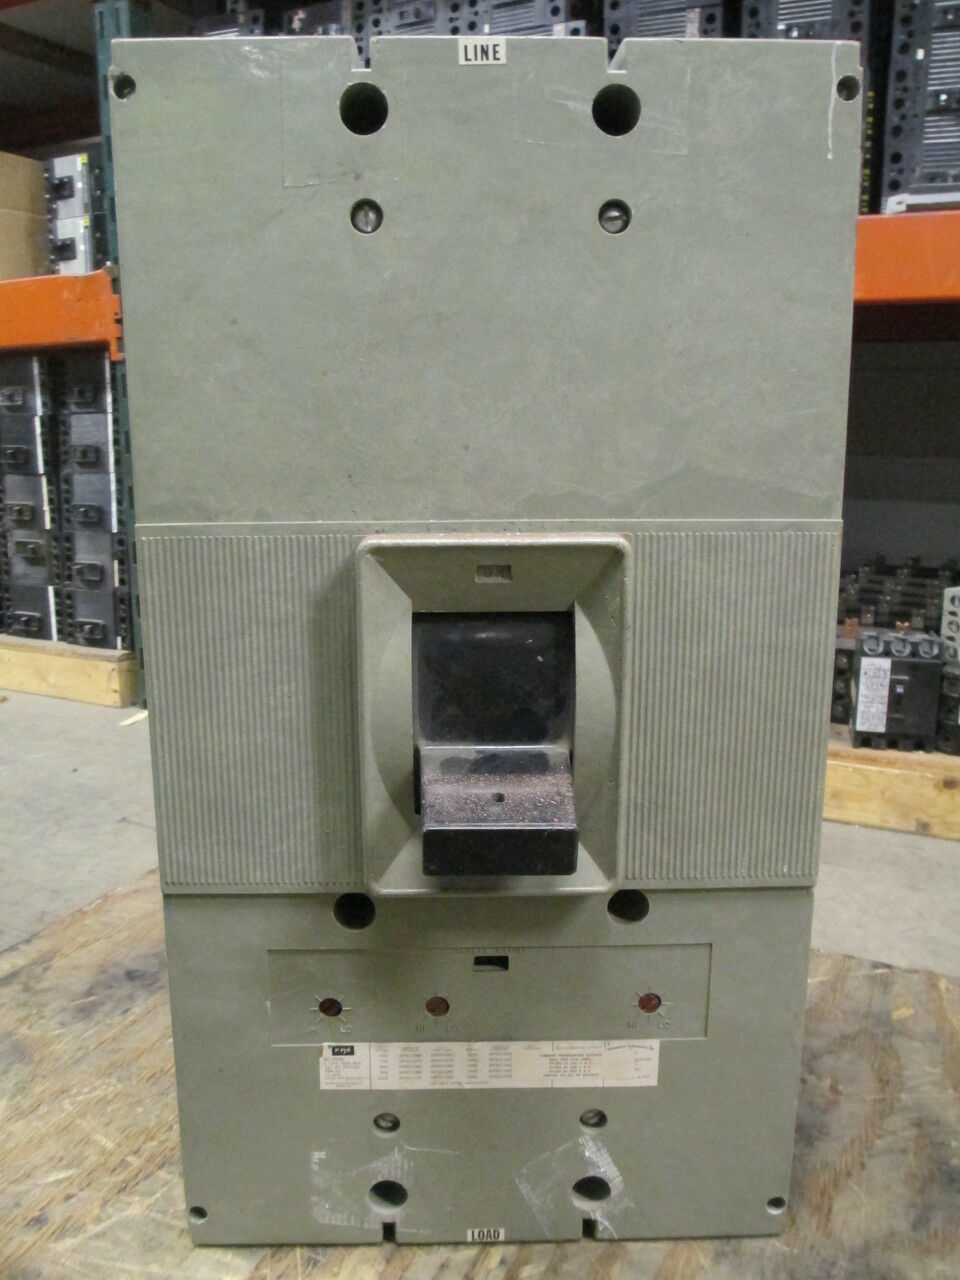 FPE NP631120 2000A Frame 1200A Rated 3P 600V MO/FM Circuit Breaker Used EOk - $4,000.00